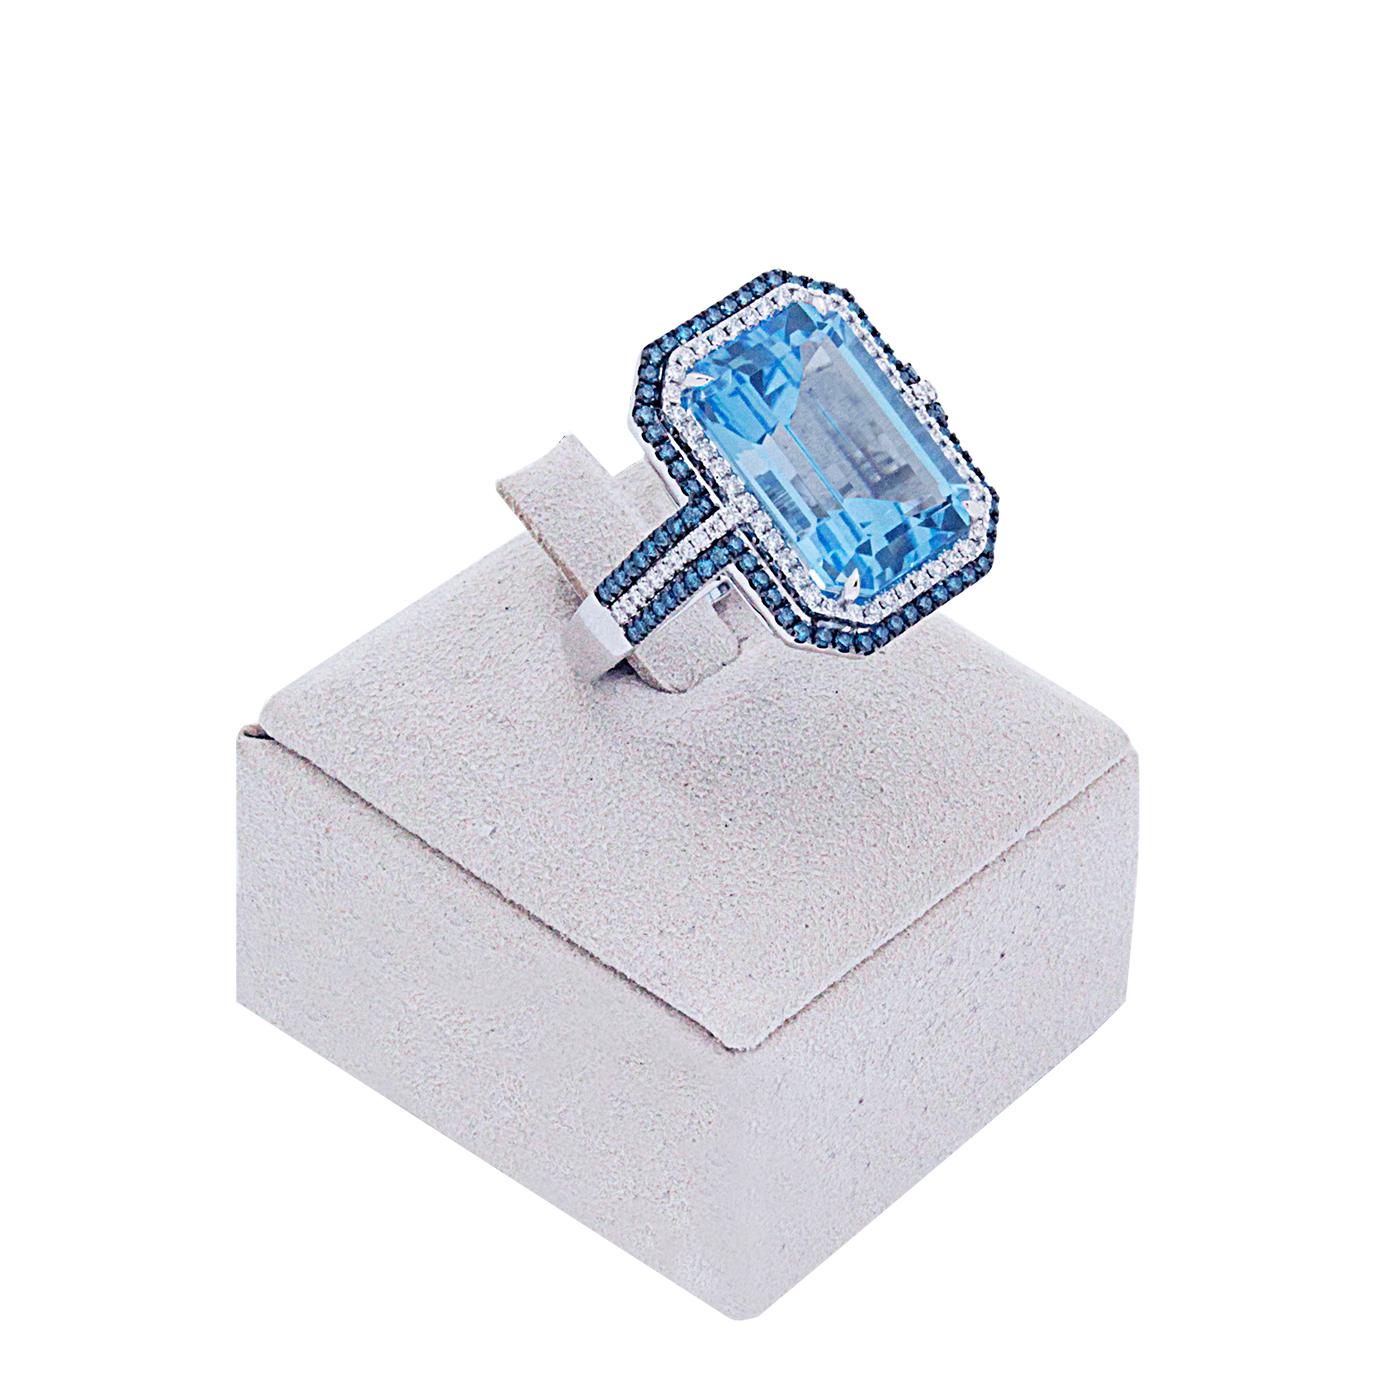 A rhapsody in blue! Gorgeously handcrafted in 18 Karat gold this collection is set with a dazzling blue topaz and blue and white diamonds.
Description of Gemstones –
White Brilliant Cut Diamonds, total carat weight – 0.30ct ‘F’ Colour ‘VVS1’